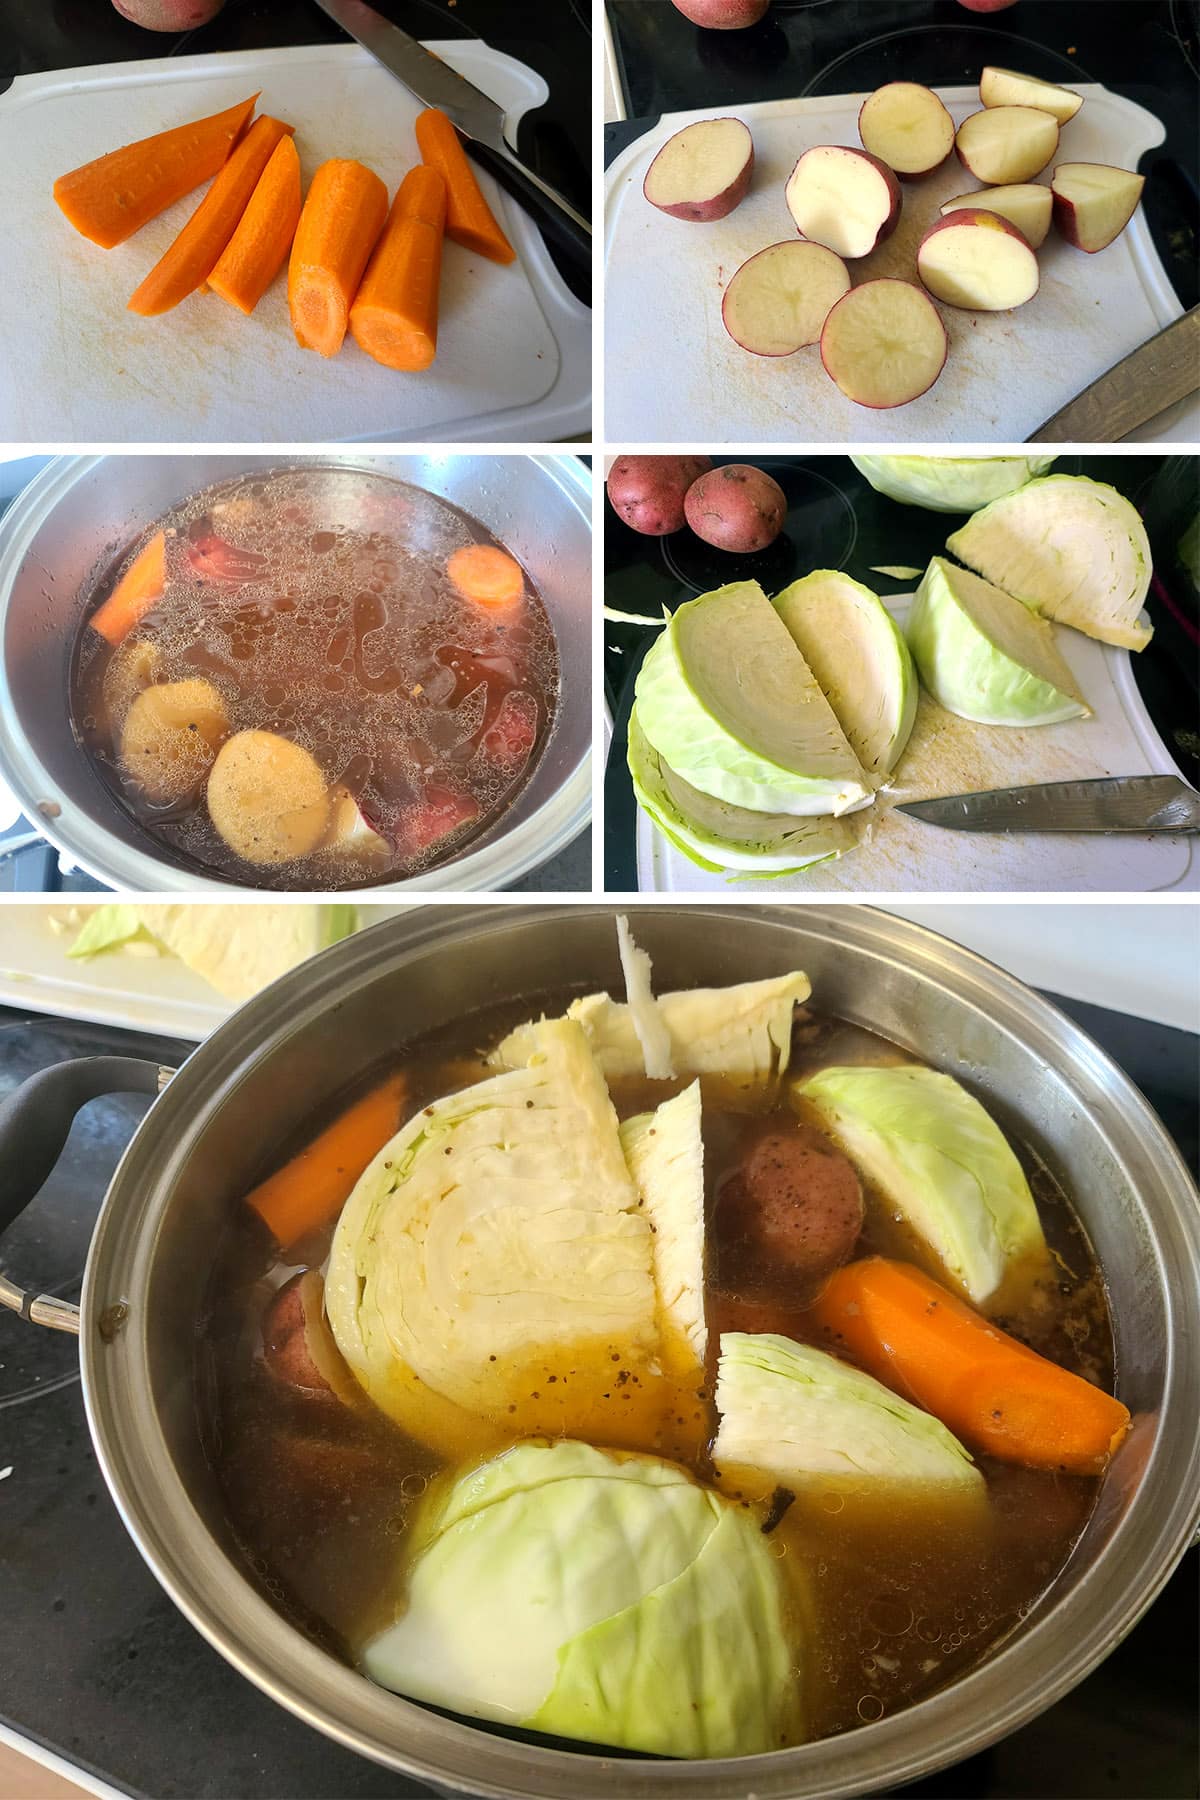 A 5 part image showing the carrots and potatoes being chopped and added to the pot, then the cabbage cut and also added.